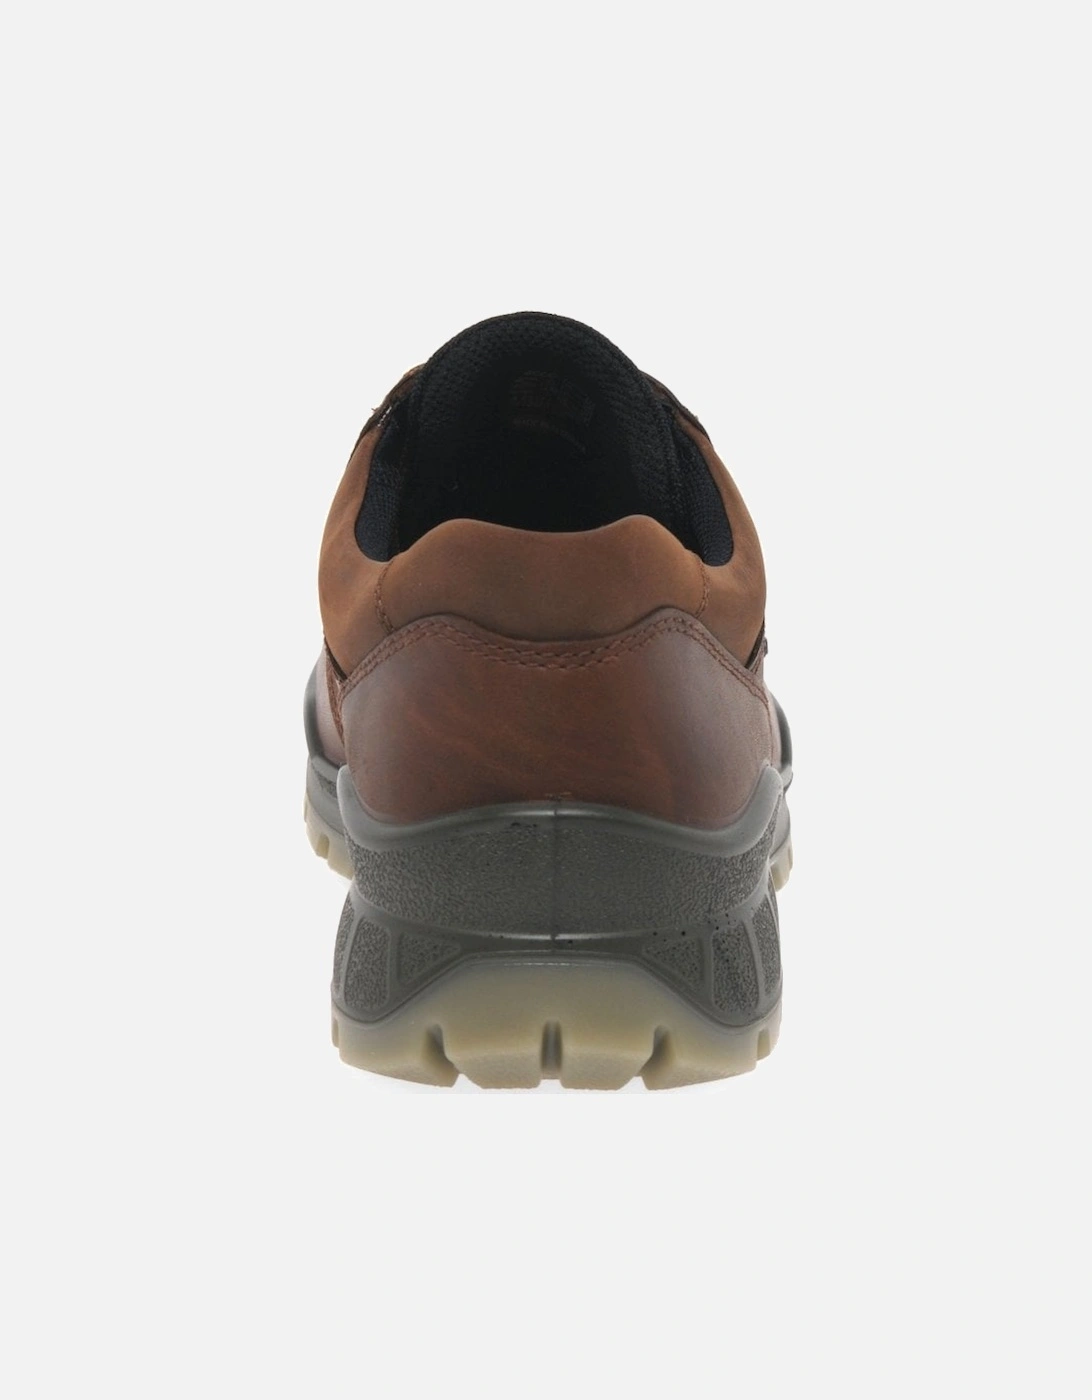 Chiltern Gore-tex Shoes